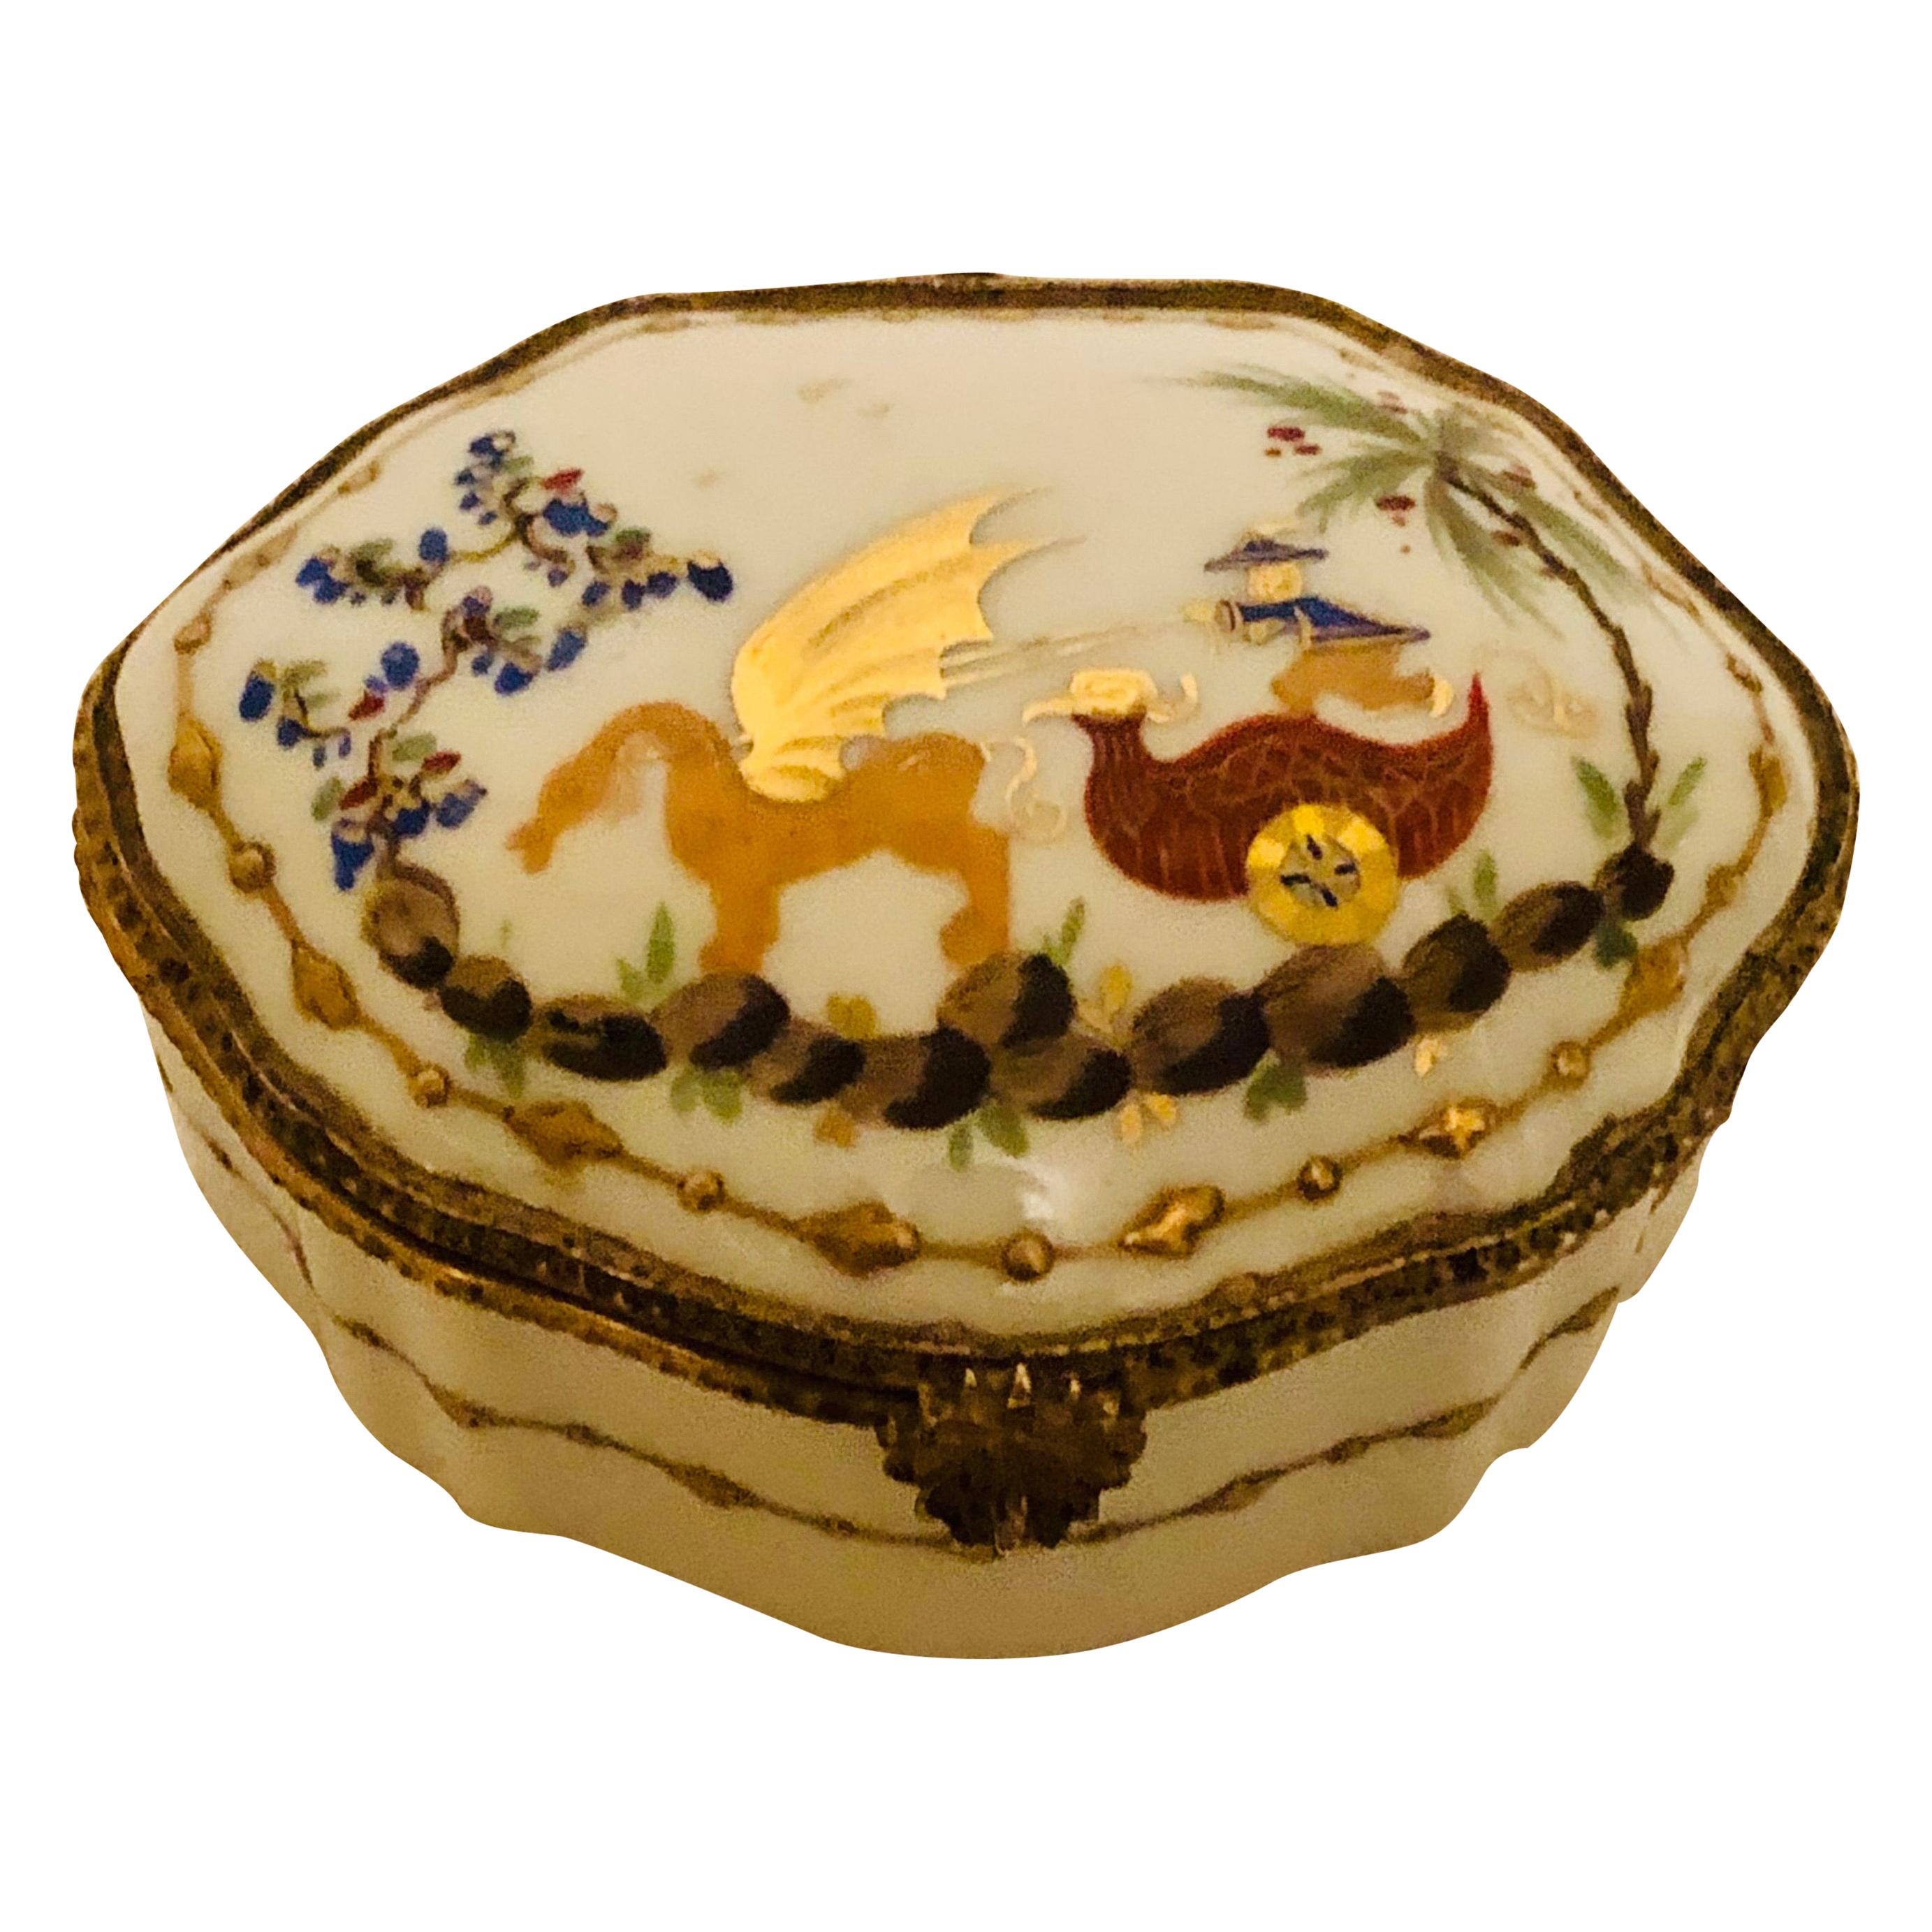 Le Tallec Porcelain Box Painted with a Whimsical Chinoiserie Scene